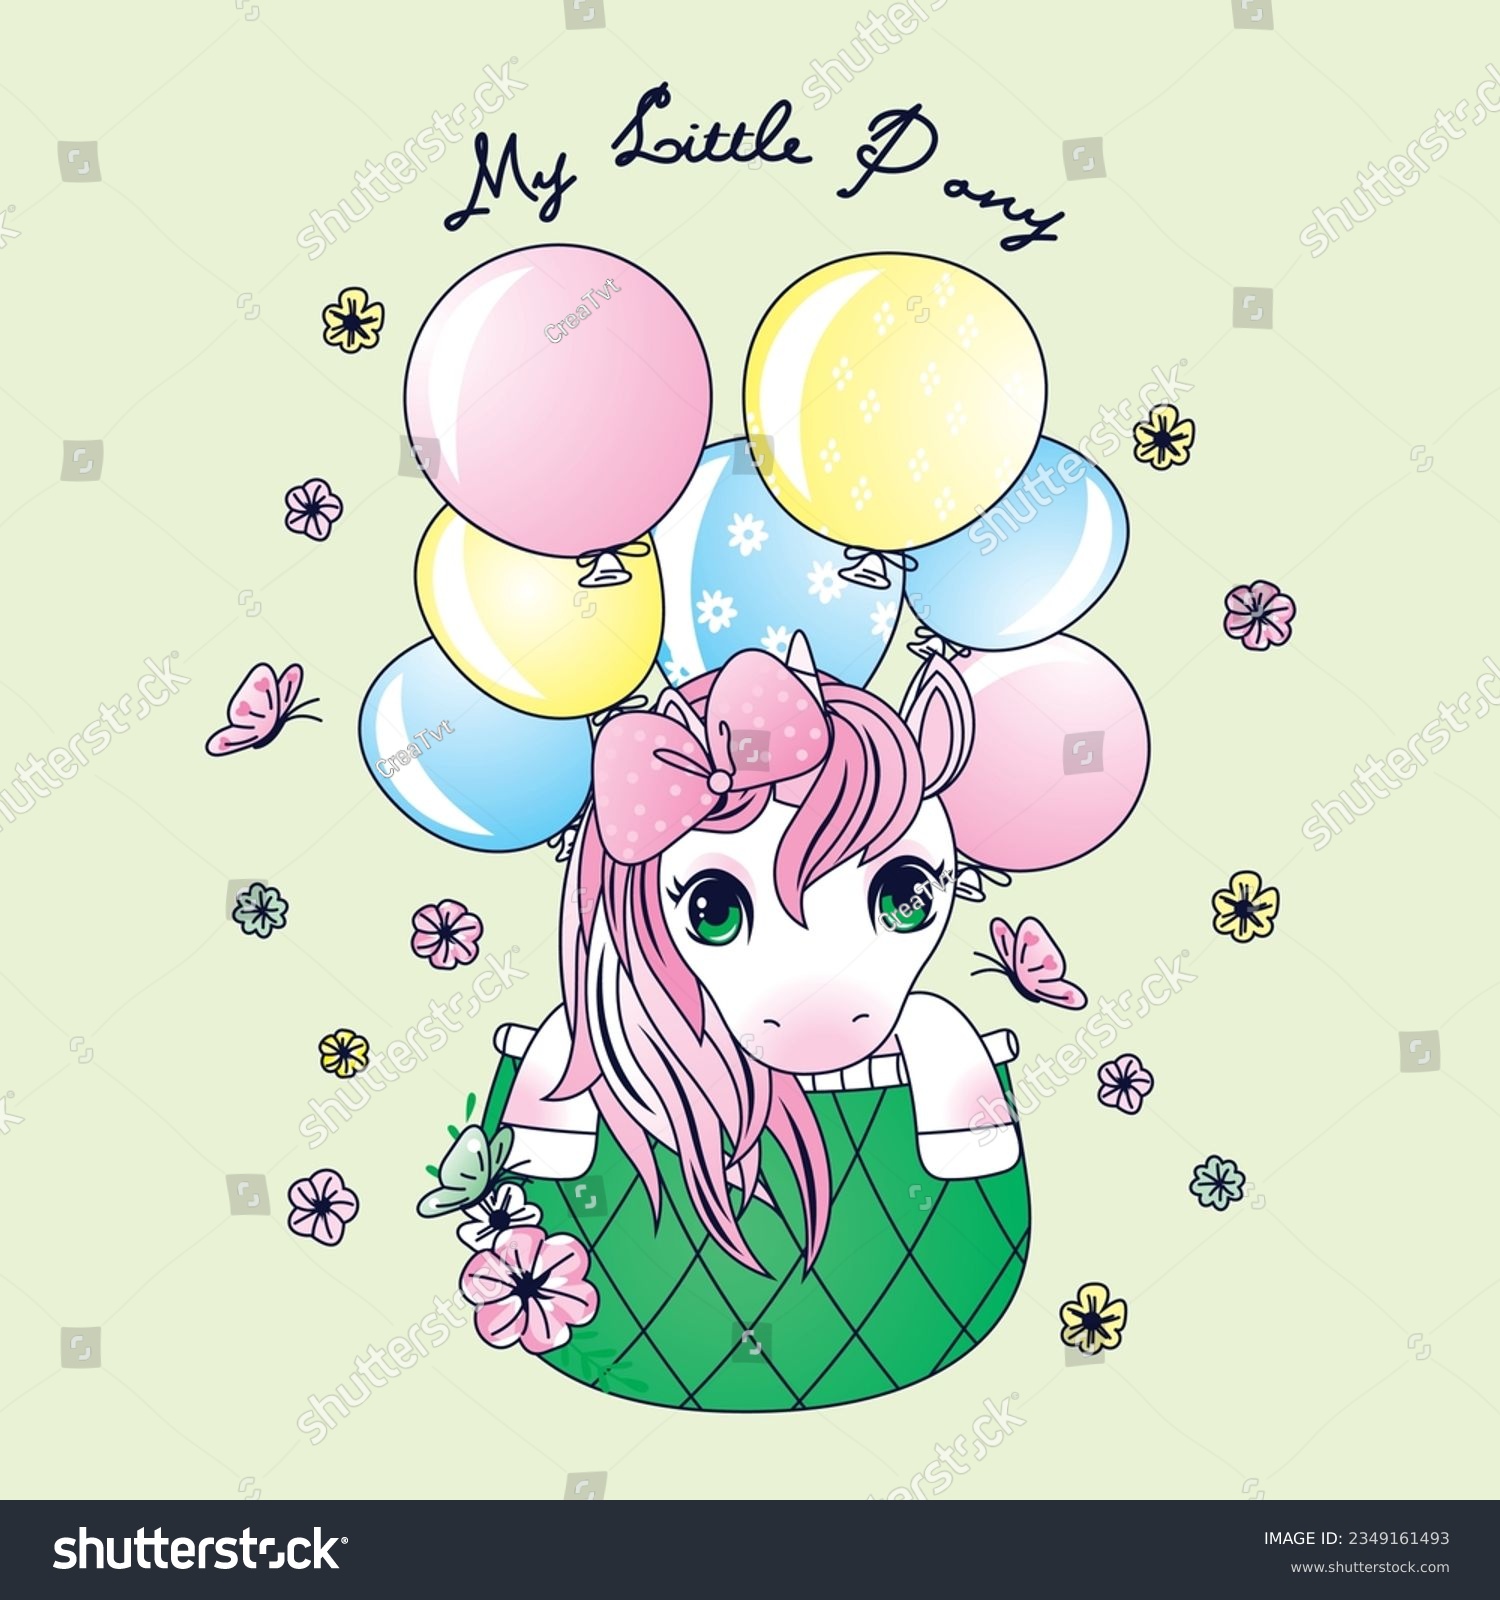 SVG of Vector of Beautiful Pony with balloons in the air PRINT DESIGN svg